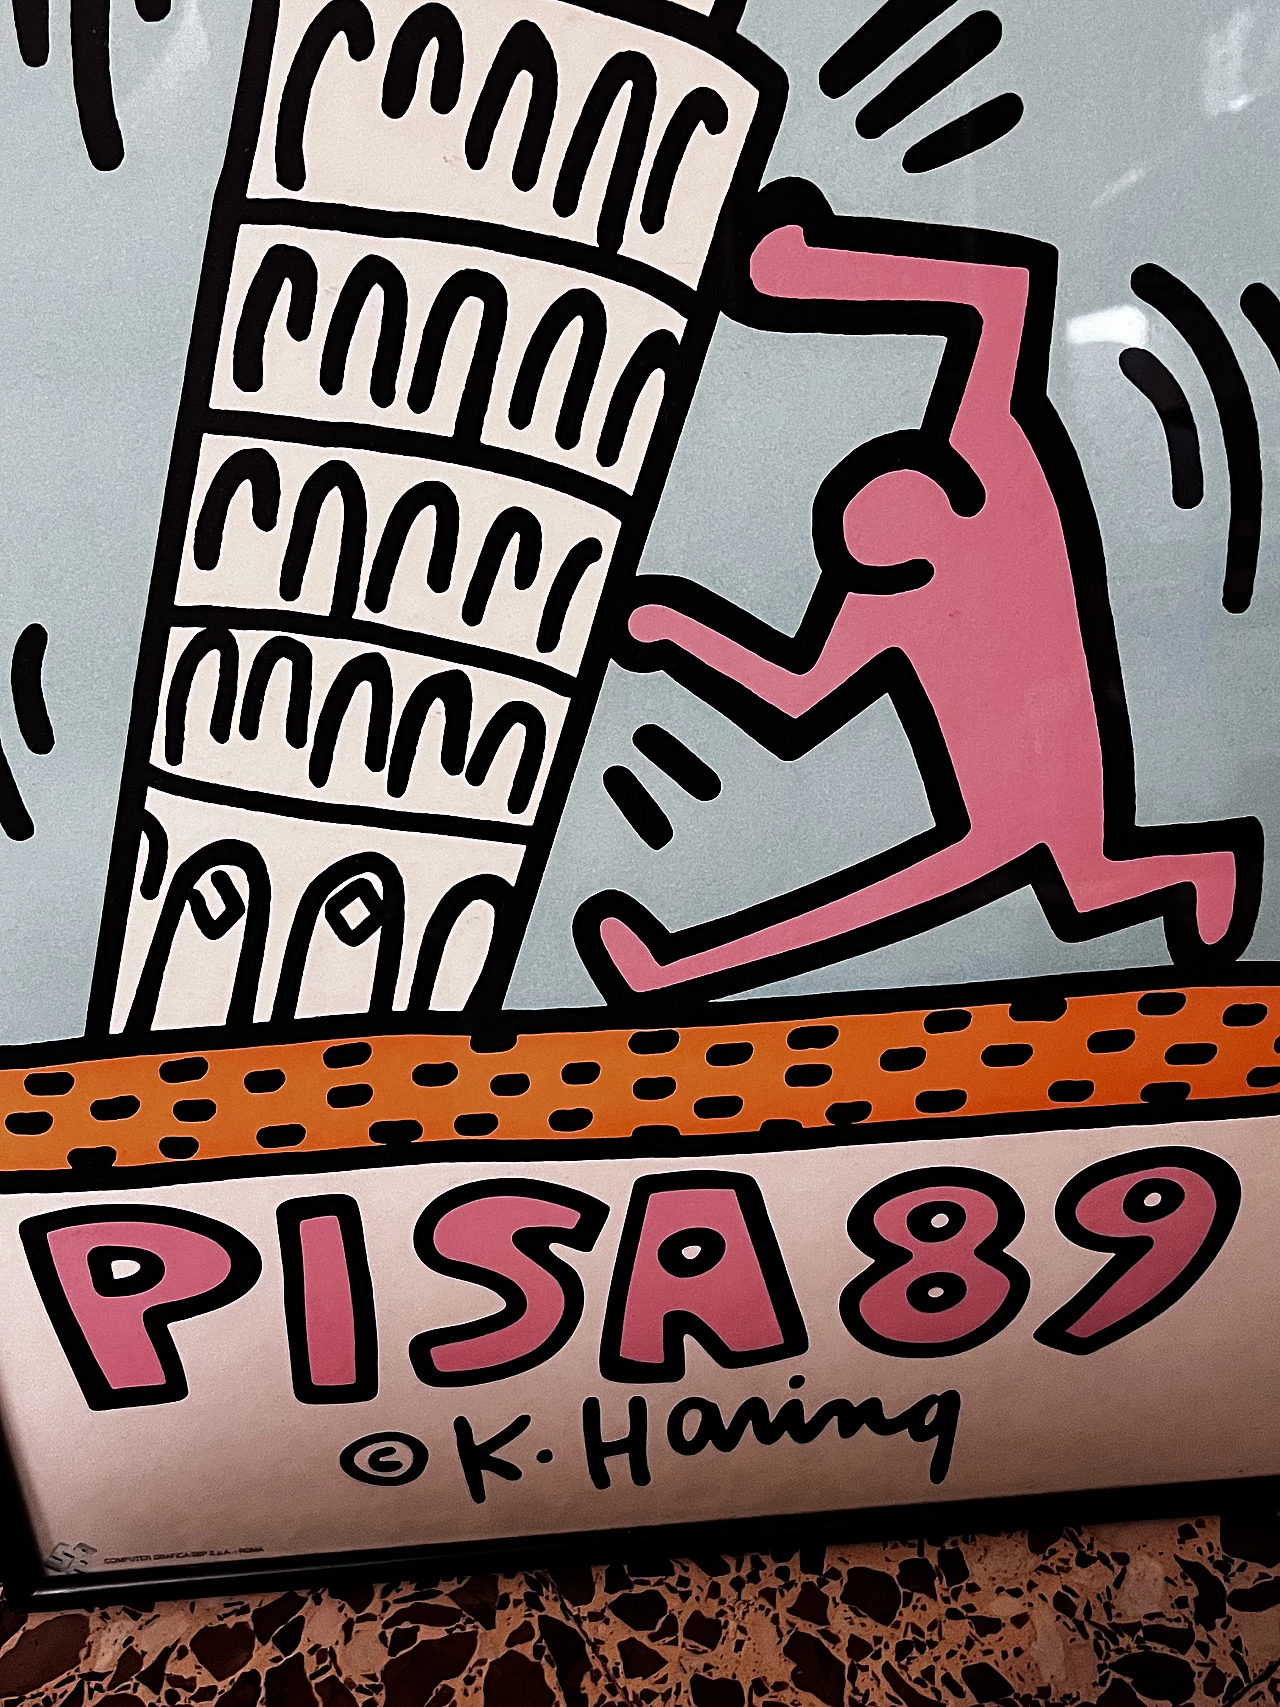 Poster Pisa 89 by Keith Haring, first edition, 1989 3